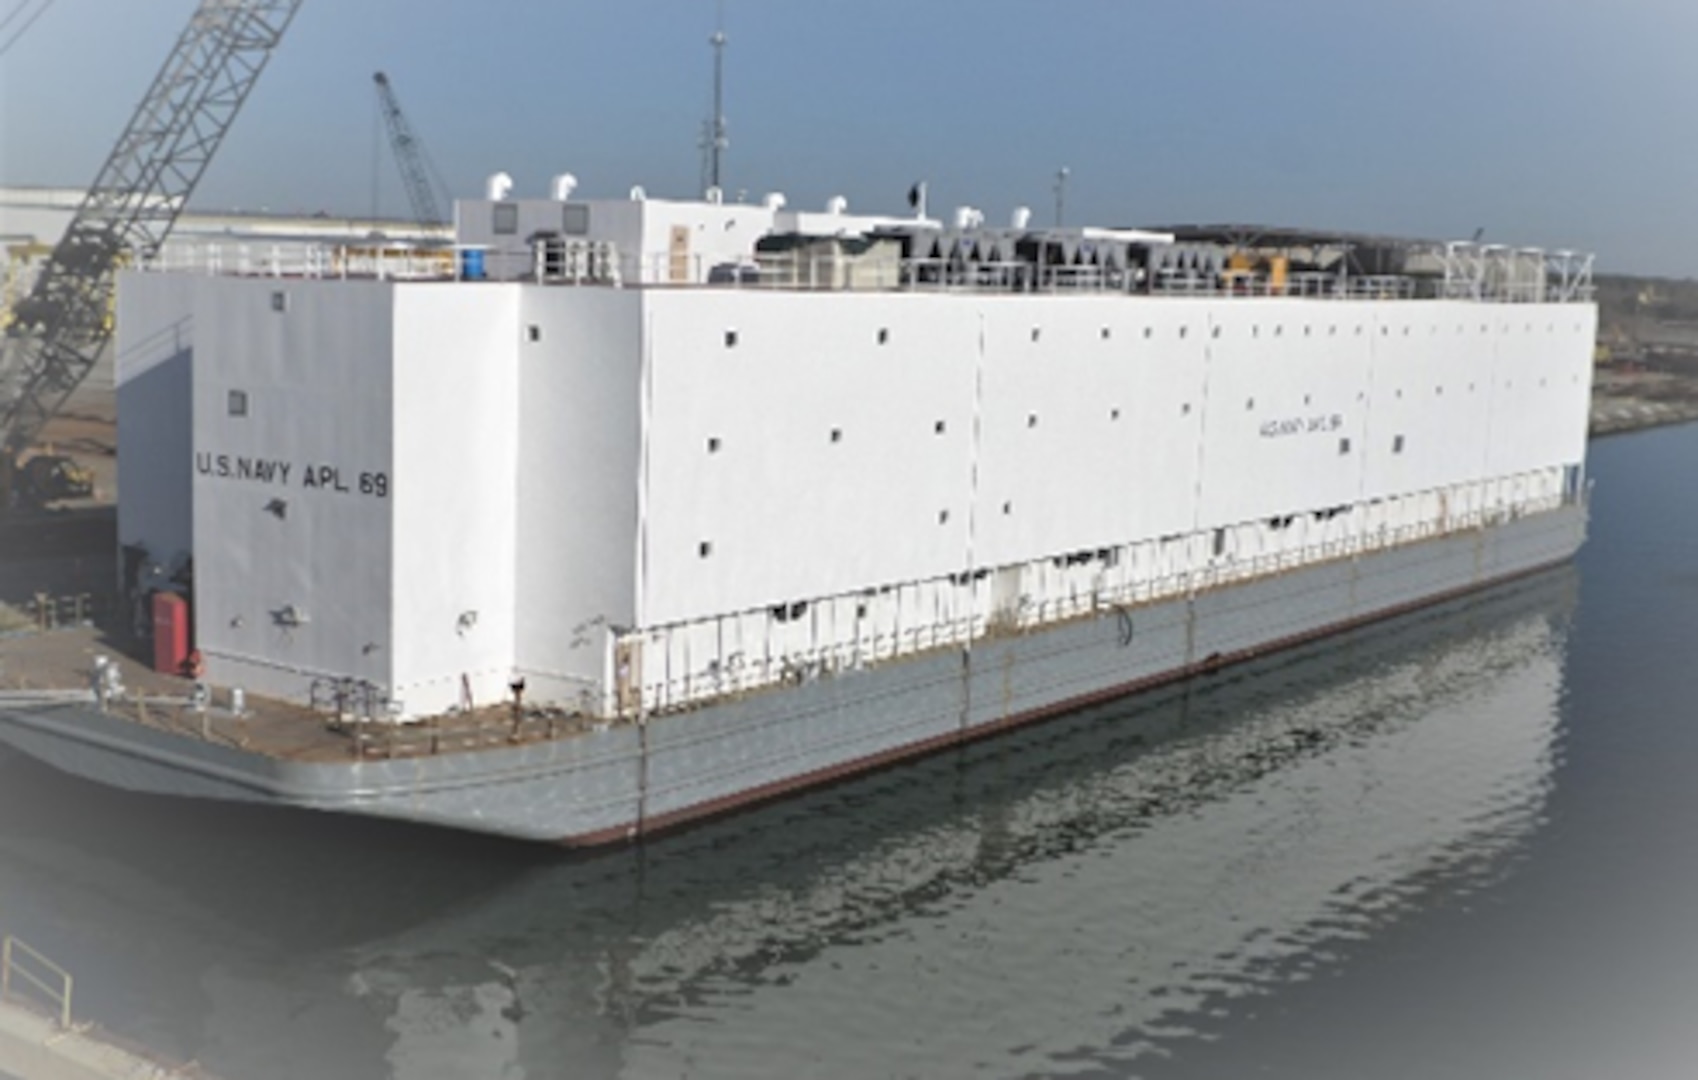 The Navy’s newest berthing barge, Auxiliary Personnel Lighter (APL) 69, recently conducted Builder’s and Acceptance Trials in Pascagoula, Mississippi.